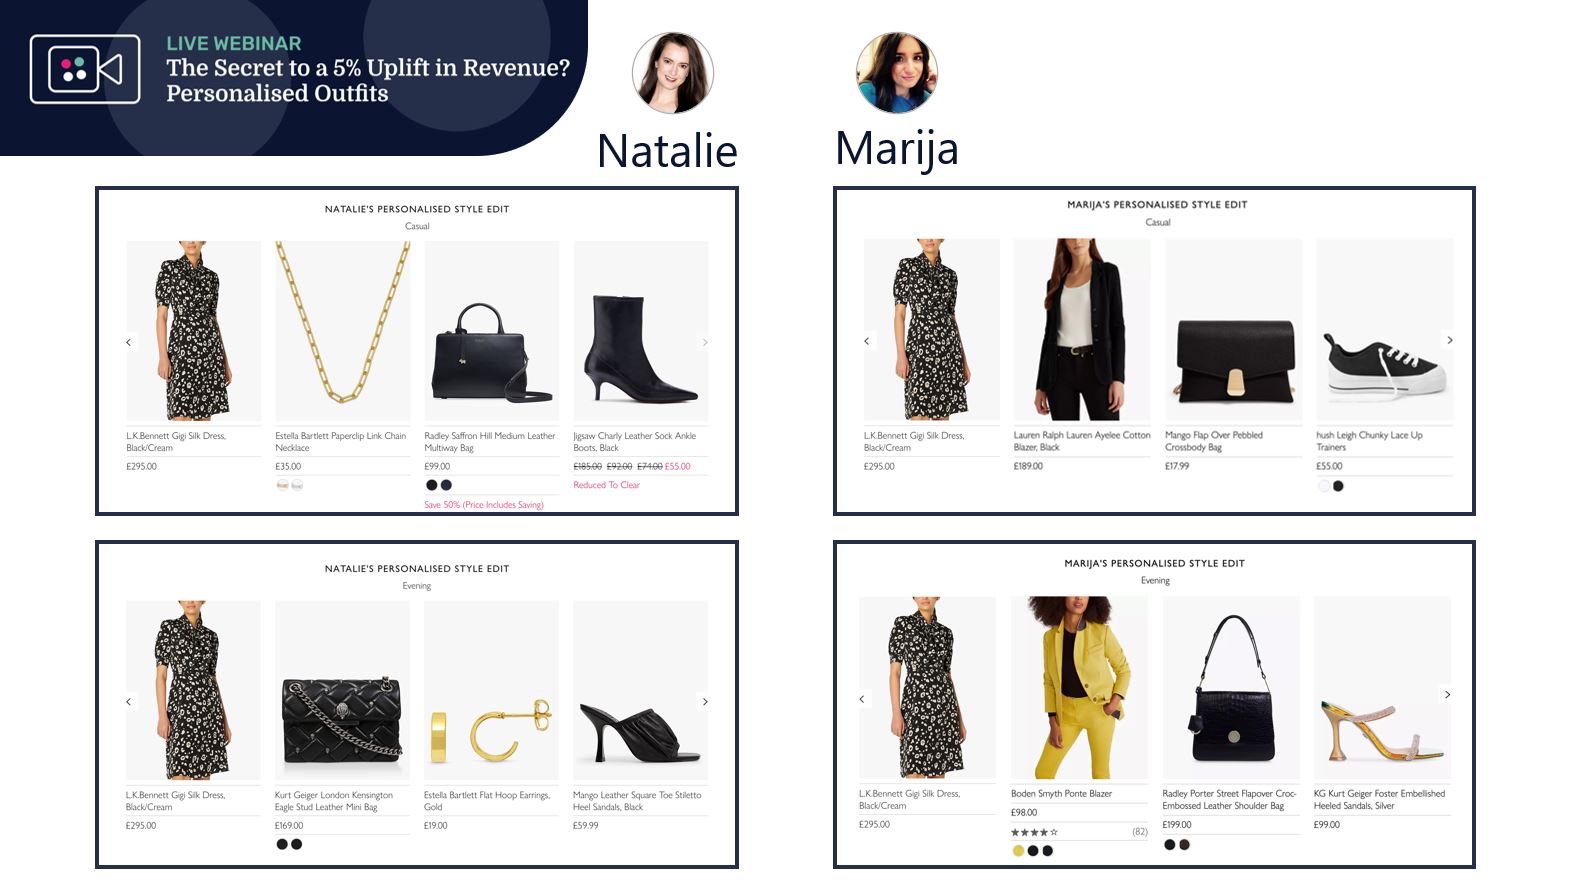 Examples of personalized outfits for Casual and Evening occasions for two different customers